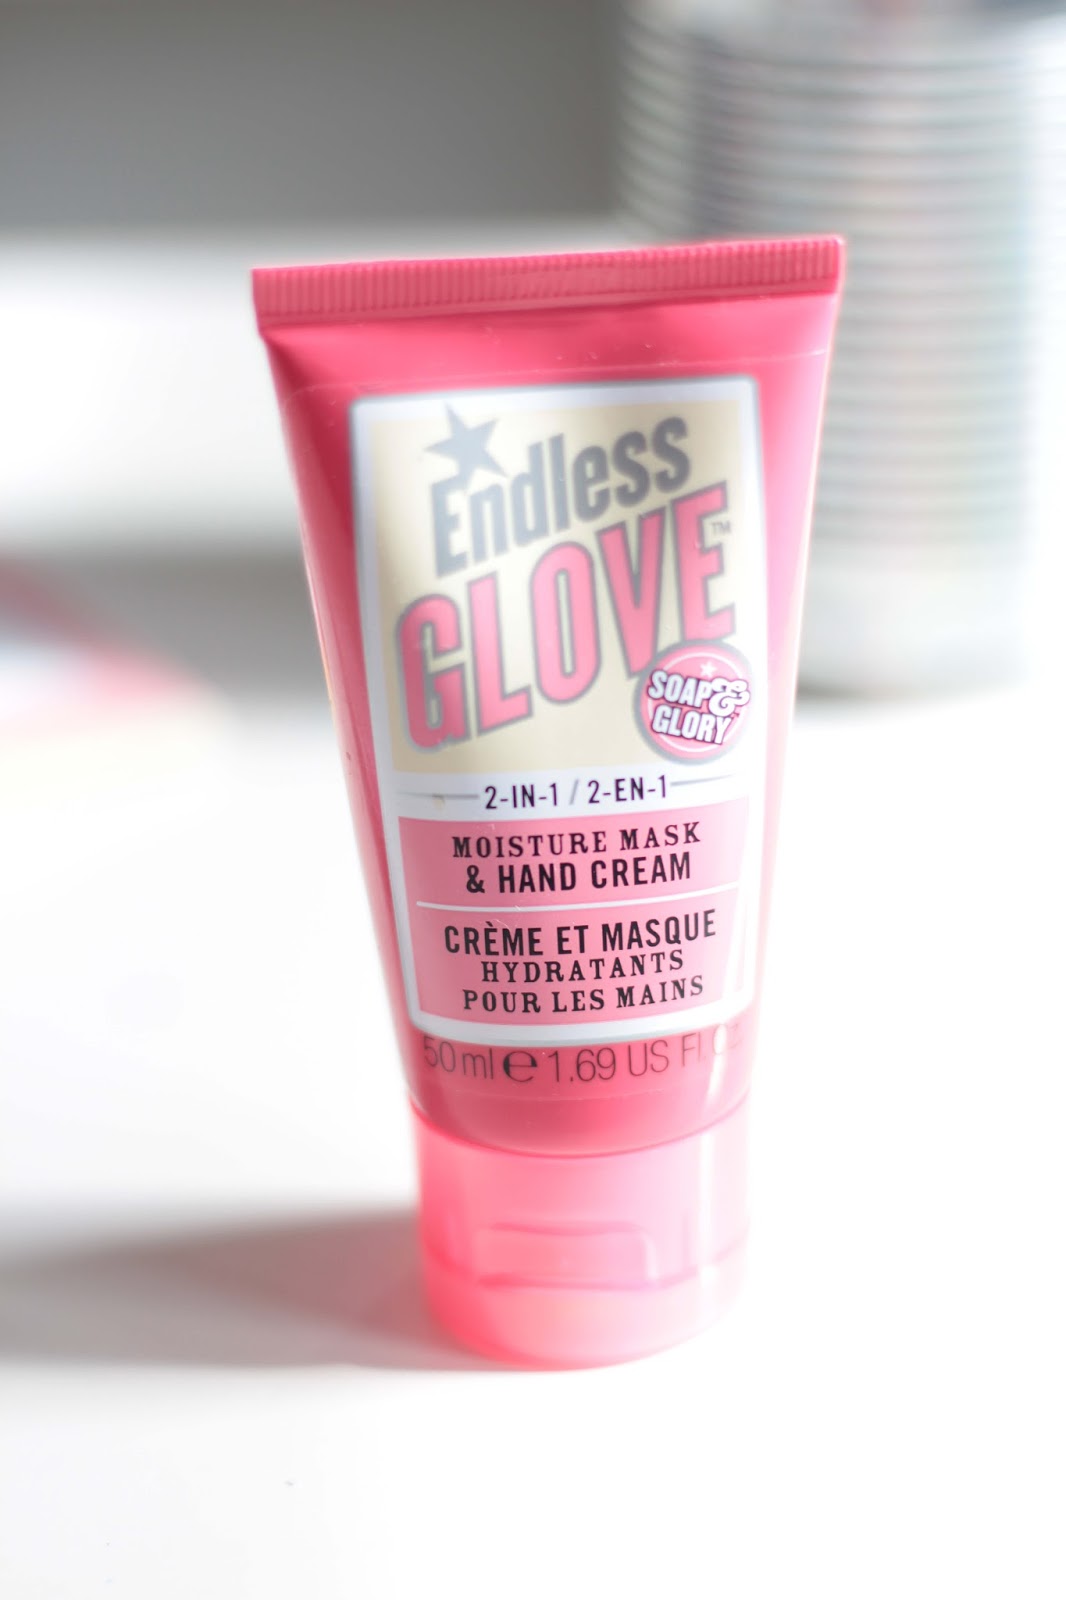 soap & glory endless glove 2 in 1 moisture mask and hand cream portrait shot and review